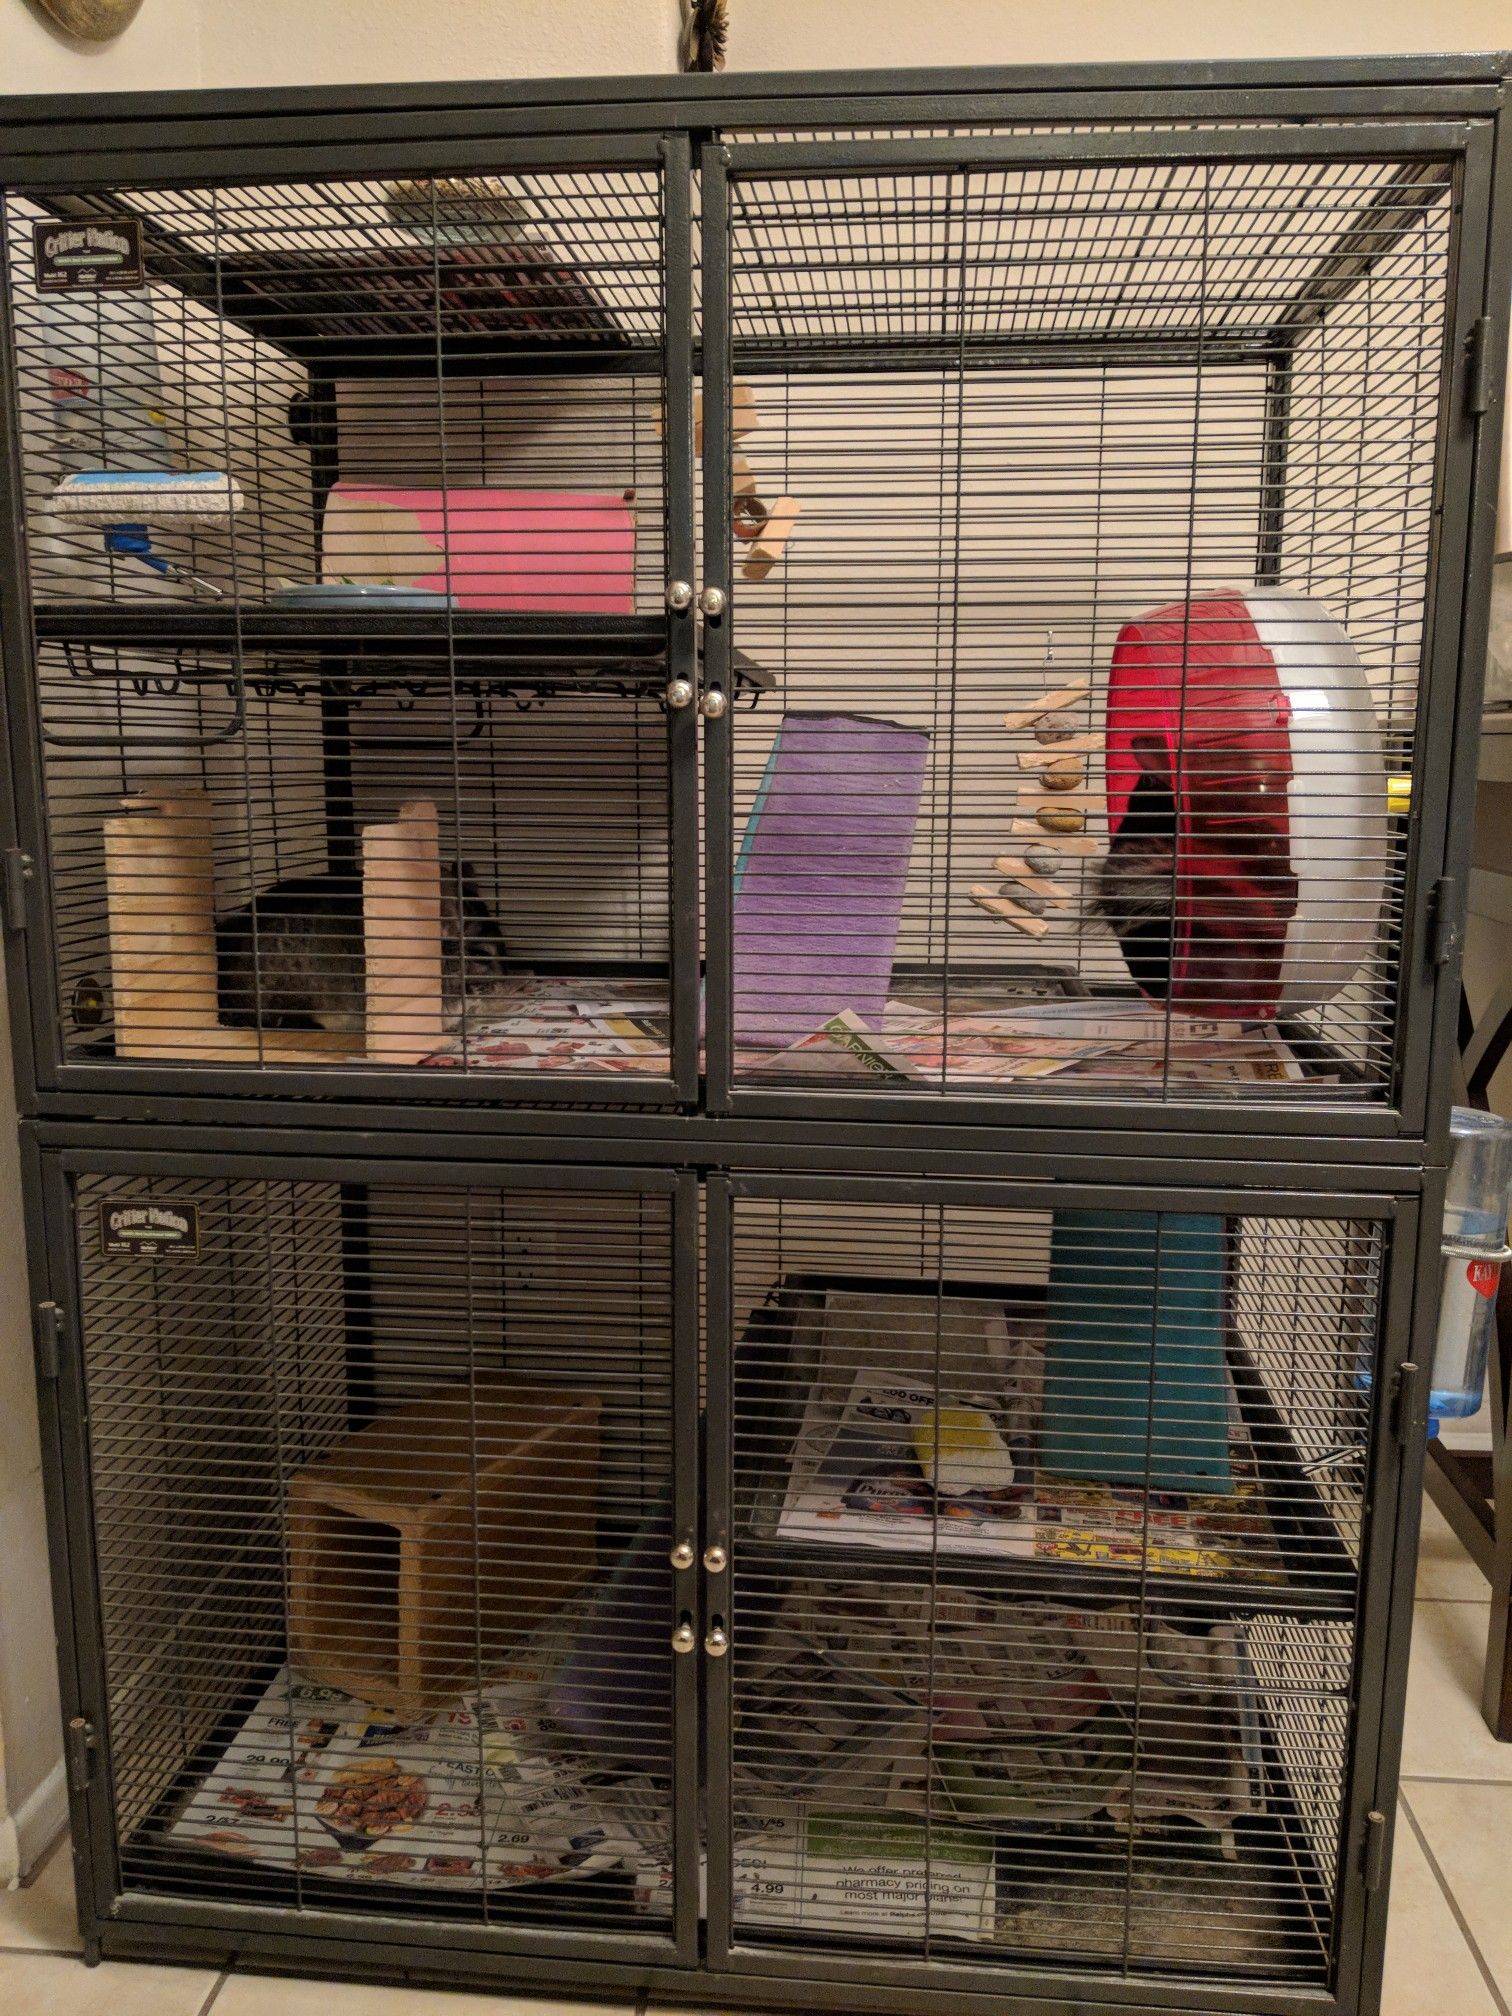 4 ft. tall chinchilla cage and other supplies